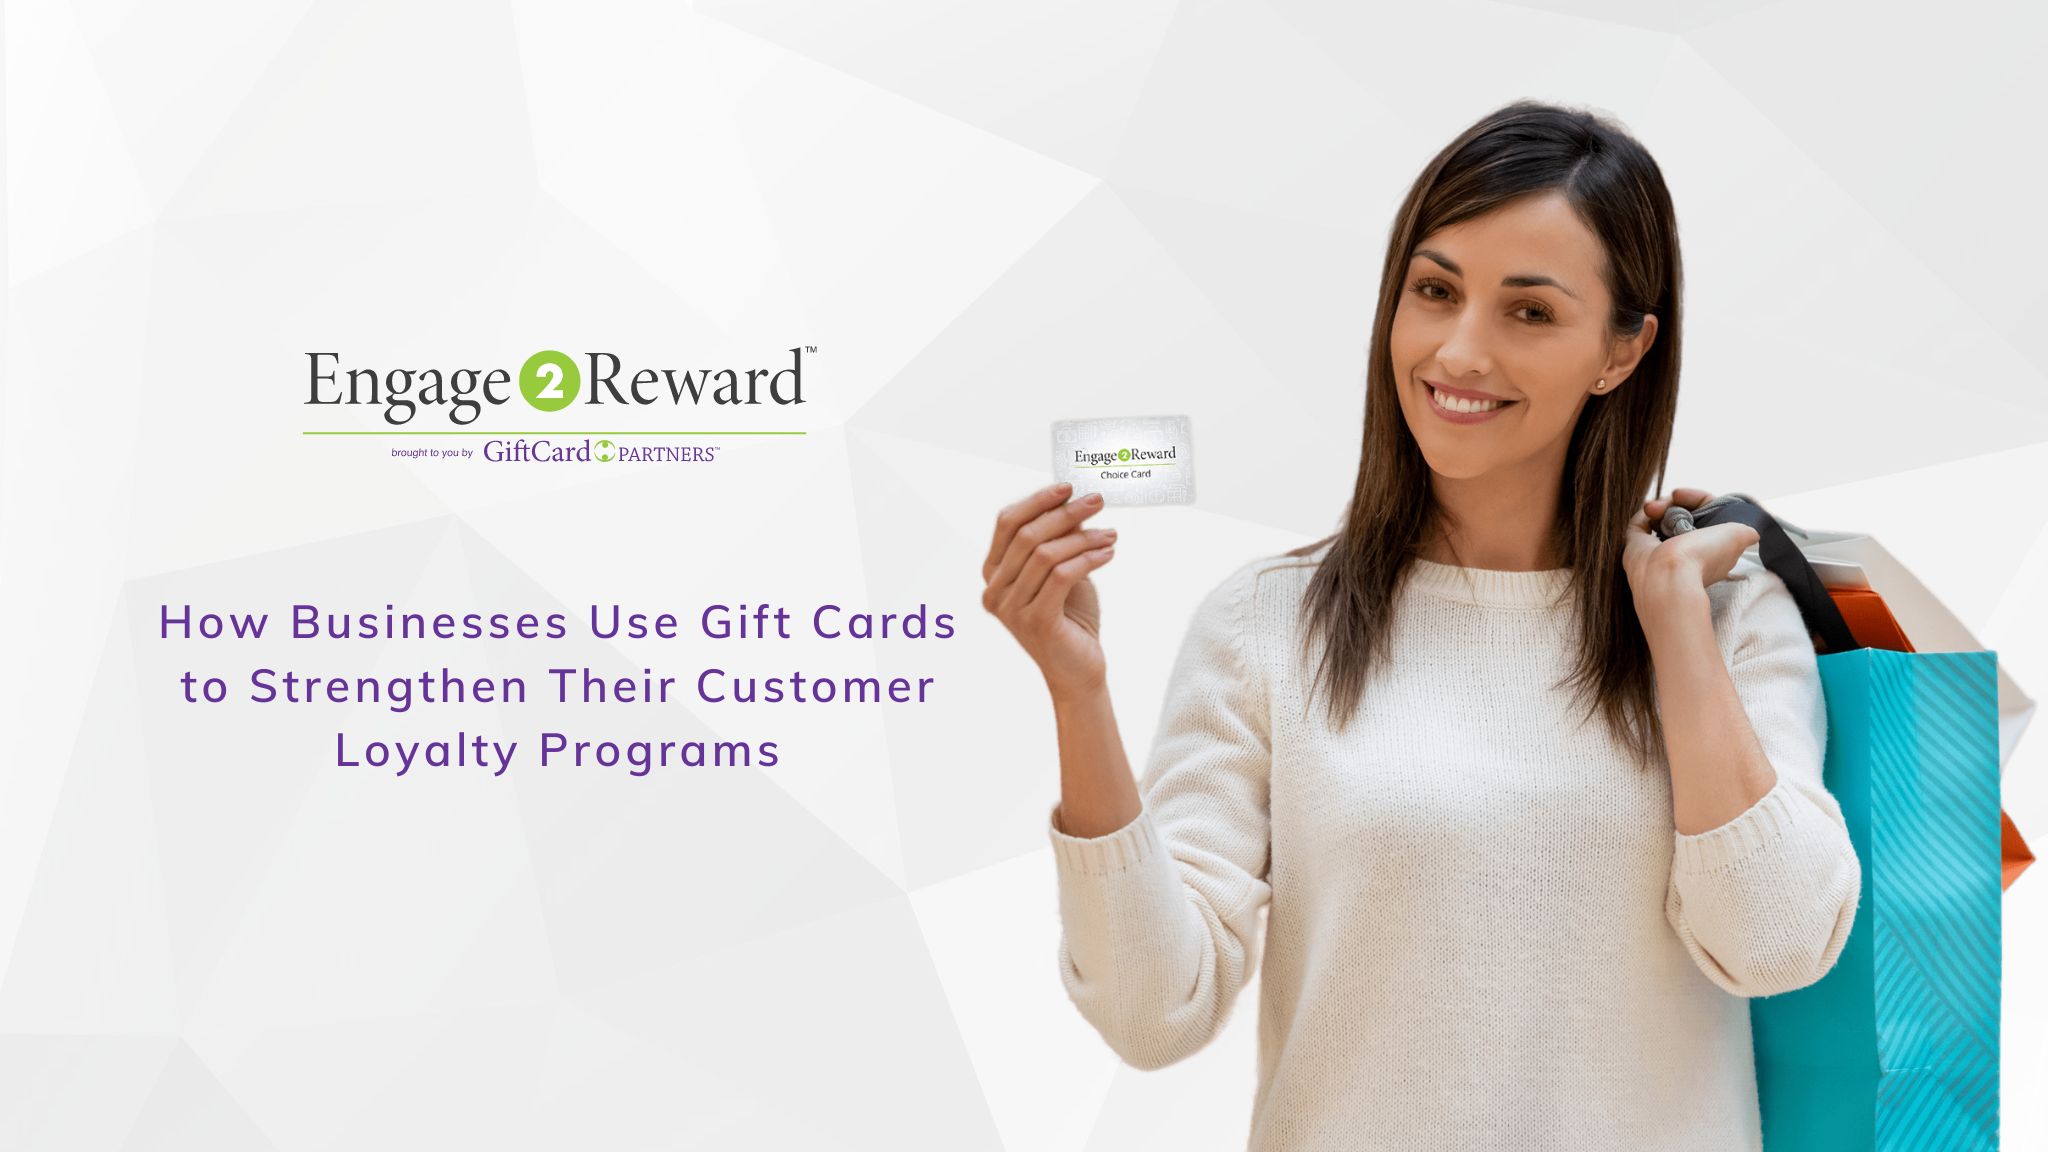 How Businesses Use Gift Cards to Strengthen Their Customer Loyalty Programs